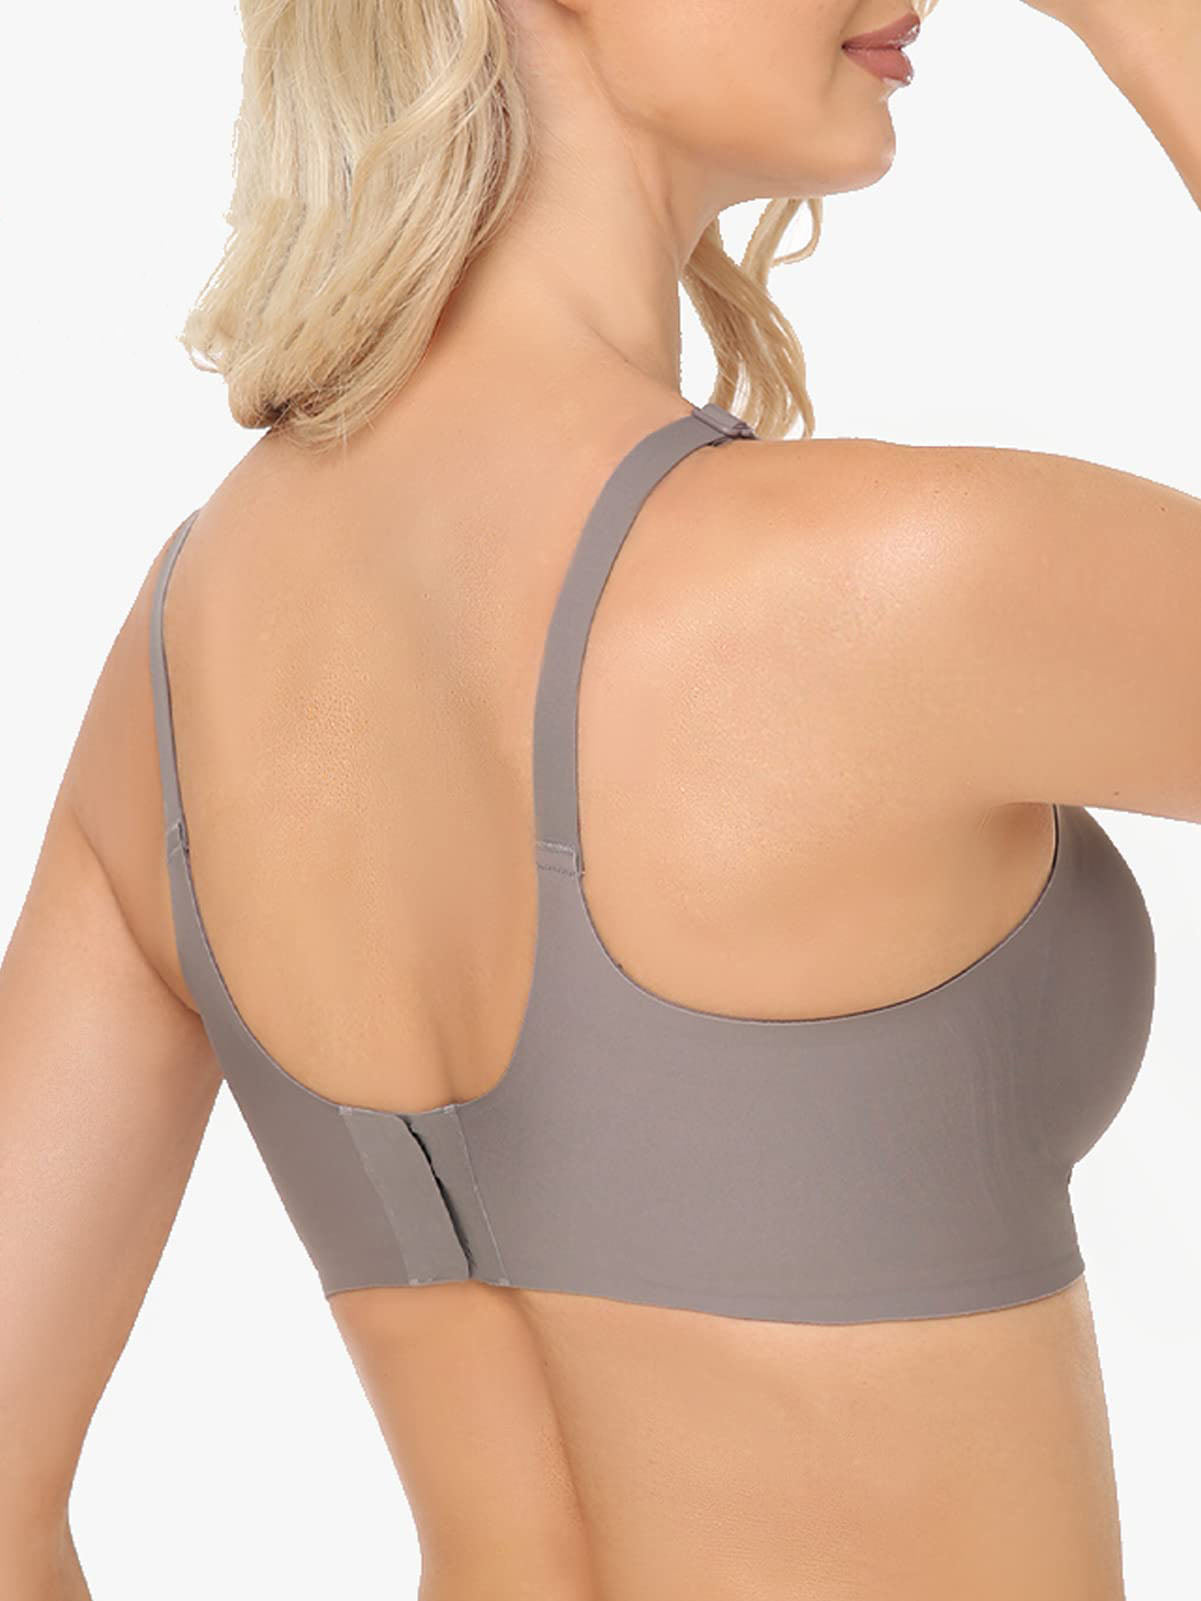 Mesh Bras for Women No Underwire Wireless Comfort Lift Push Up Bralettes for Women with Support and Bra Gray